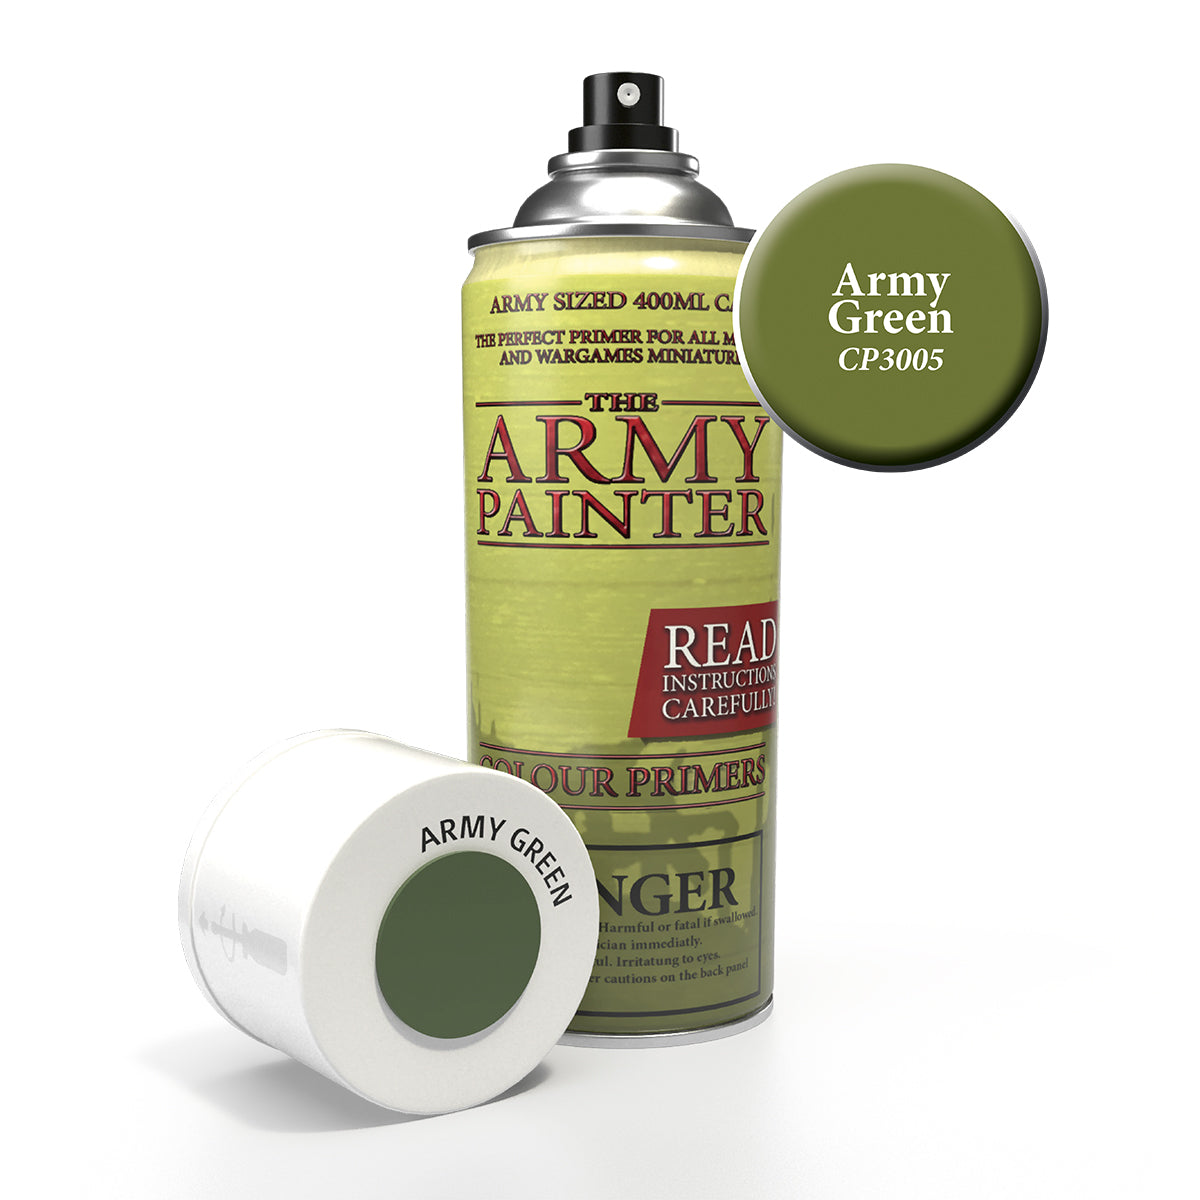 Army Painter - Base Primer Army Green